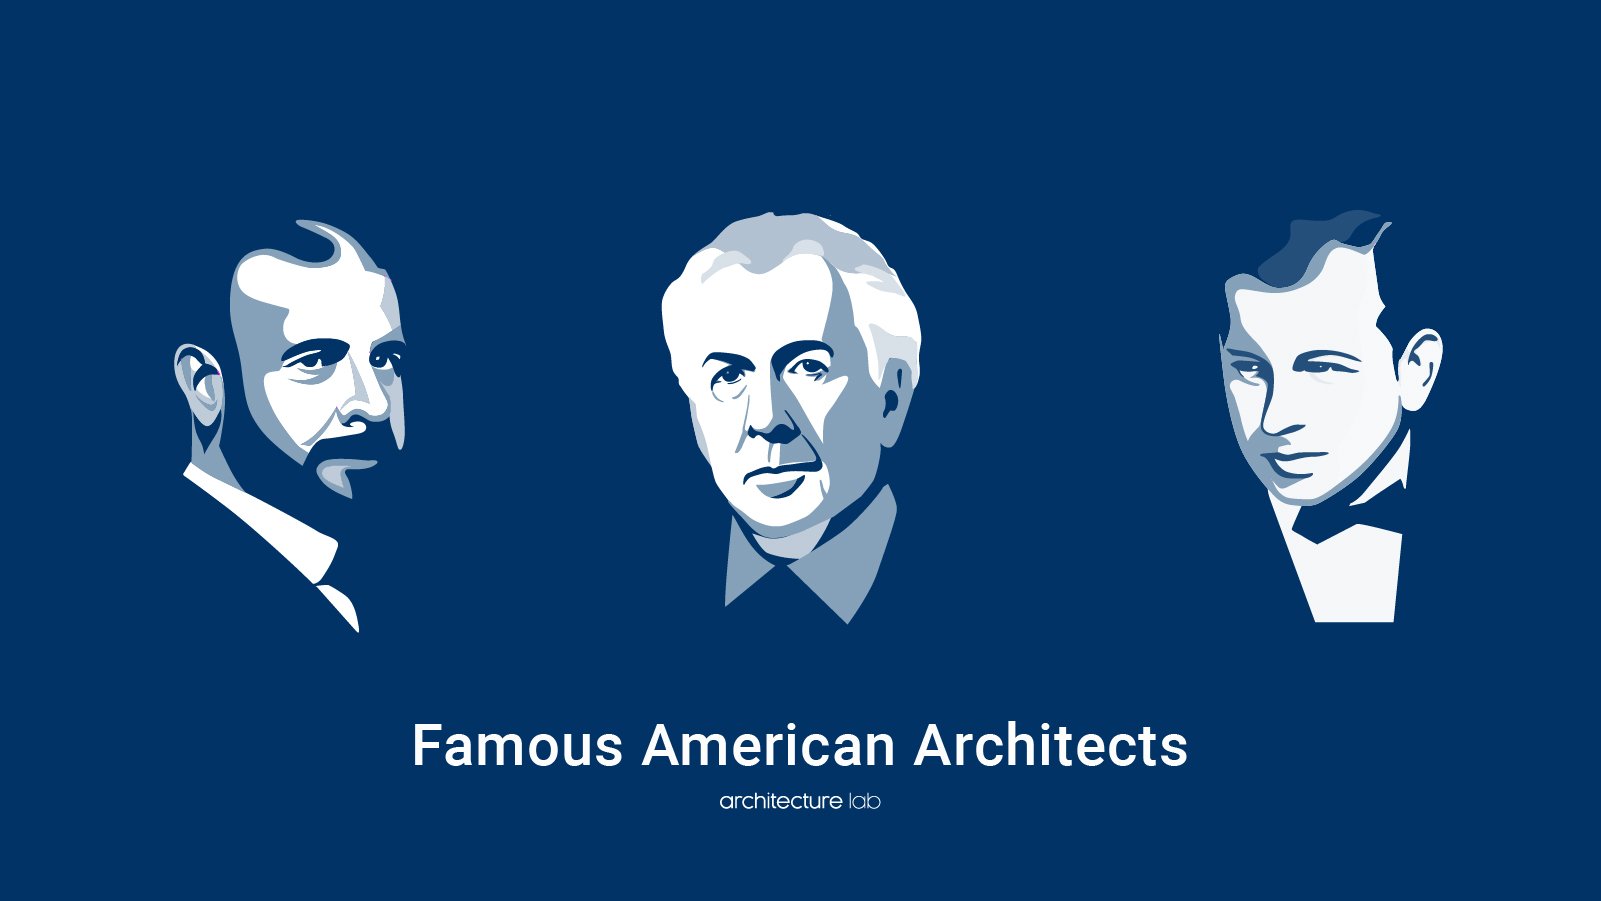 18 famous american architects and their proud works